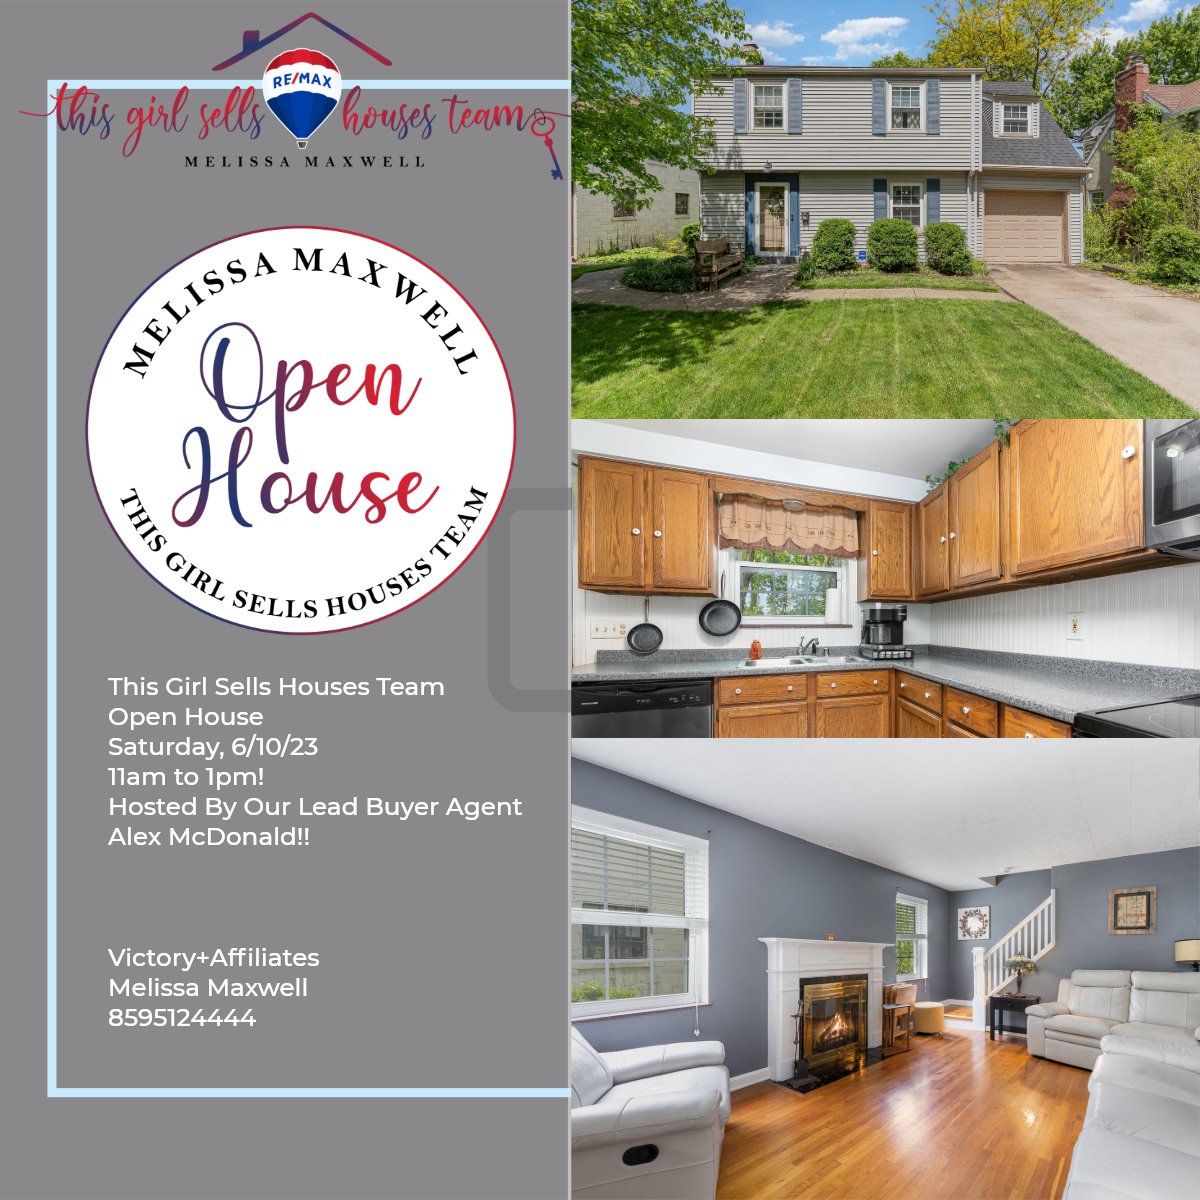 Open House Tomorrow (Saturday, 6/10/23) From 11am to 1pm Hosted By Lead Buyer Agent: Alex Jeffries-McDonald!!
Come Out And Take A Tour!
THIS IS A MUST SEE!
#ThisGirlSellsOhioAndKY
#ThisGirlSellsHousesTeam
#ThisGirlSellsHouses
#ReferYourGirl
#openhousesaturday